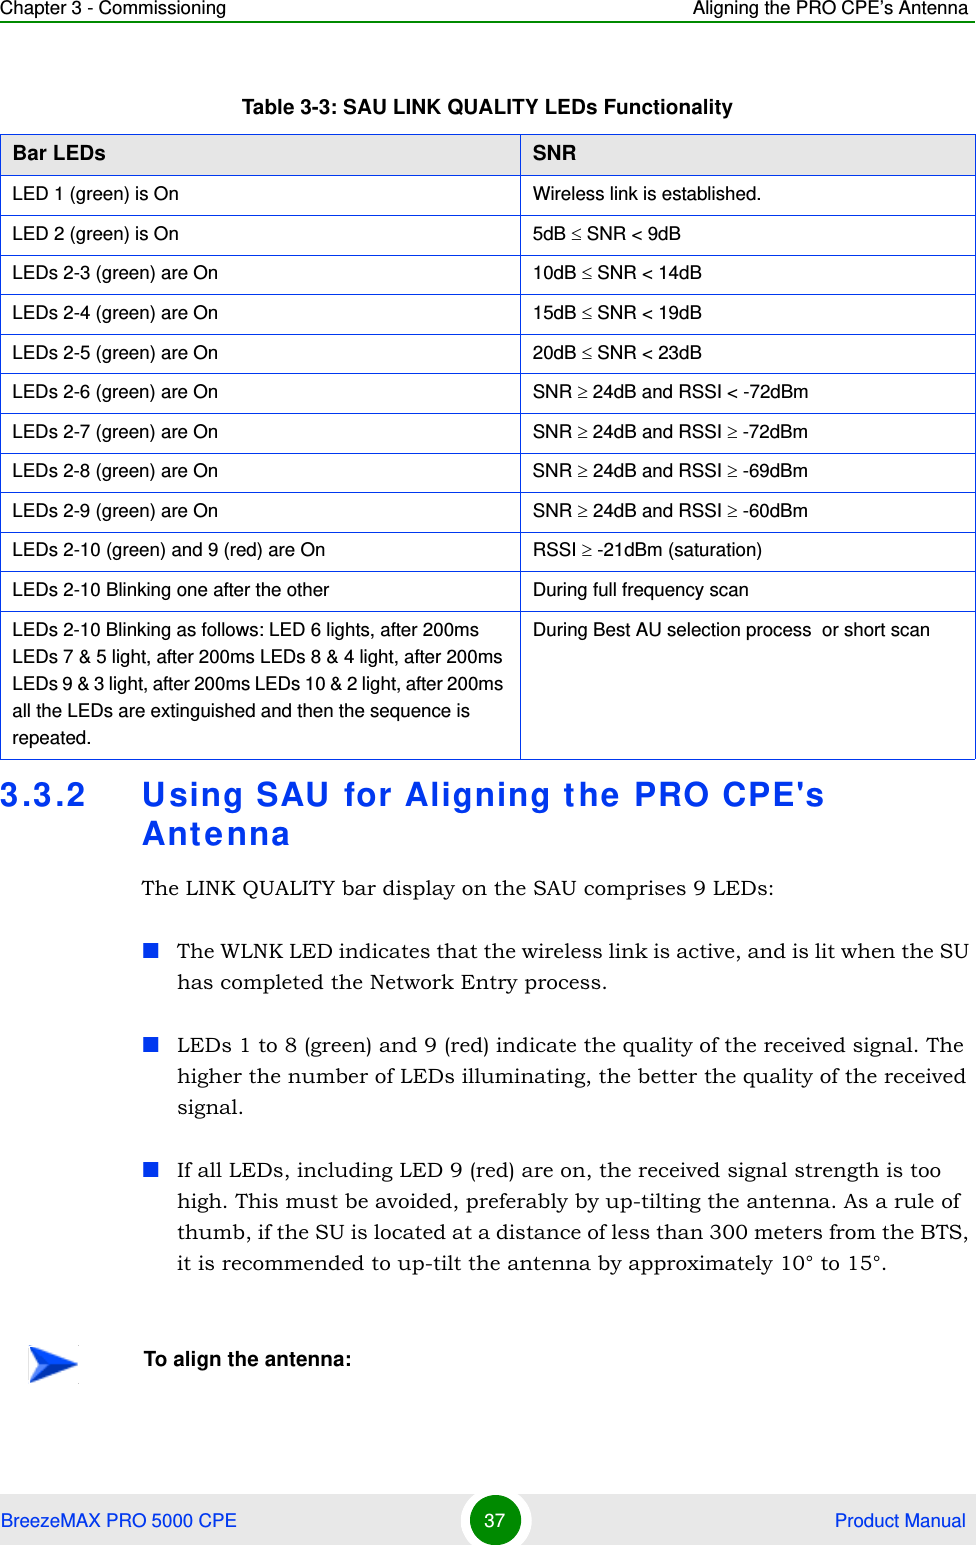 Chapter 3 - Commissioning Aligning the PRO CPE’s AntennaBreezeMAX PRO 5000 CPE 37  Product Manual3.3.2 Using SAU for Aligning the PRO CPE&apos;s AntennaThe LINK QUALITY bar display on the SAU comprises 9 LEDs:The WLNK LED indicates that the wireless link is active, and is lit when the SU has completed the Network Entry process. LEDs 1 to 8 (green) and 9 (red) indicate the quality of the received signal. The higher the number of LEDs illuminating, the better the quality of the received signal.If all LEDs, including LED 9 (red) are on, the received signal strength is too high. This must be avoided, preferably by up-tilting the antenna. As a rule of thumb, if the SU is located at a distance of less than 300 meters from the BTS, it is recommended to up-tilt the antenna by approximately 10° to 15°.Table 3-3: SAU LINK QUALITY LEDs FunctionalityBar LEDs SNRLED 1 (green) is On Wireless link is established.LED 2 (green) is On 5dB  SNR &lt; 9dBLEDs 2-3 (green) are On 10dB  SNR &lt; 14dBLEDs 2-4 (green) are On 15dB  SNR &lt; 19dBLEDs 2-5 (green) are On 20dB  SNR &lt; 23dBLEDs 2-6 (green) are On SNR  24dB and RSSI &lt; -72dBmLEDs 2-7 (green) are On SNR  24dB and RSSI  -72dBmLEDs 2-8 (green) are On SNR  24dB and RSSI  -69dBm LEDs 2-9 (green) are On SNR  24dB and RSSI  -60dBm LEDs 2-10 (green) and 9 (red) are On RSSI  -21dBm (saturation)LEDs 2-10 Blinking one after the other During full frequency scanLEDs 2-10 Blinking as follows: LED 6 lights, after 200ms LEDs 7 &amp; 5 light, after 200ms LEDs 8 &amp; 4 light, after 200ms LEDs 9 &amp; 3 light, after 200ms LEDs 10 &amp; 2 light, after 200ms all the LEDs are extinguished and then the sequence is repeated. During Best AU selection process  or short scanTo align the antenna: